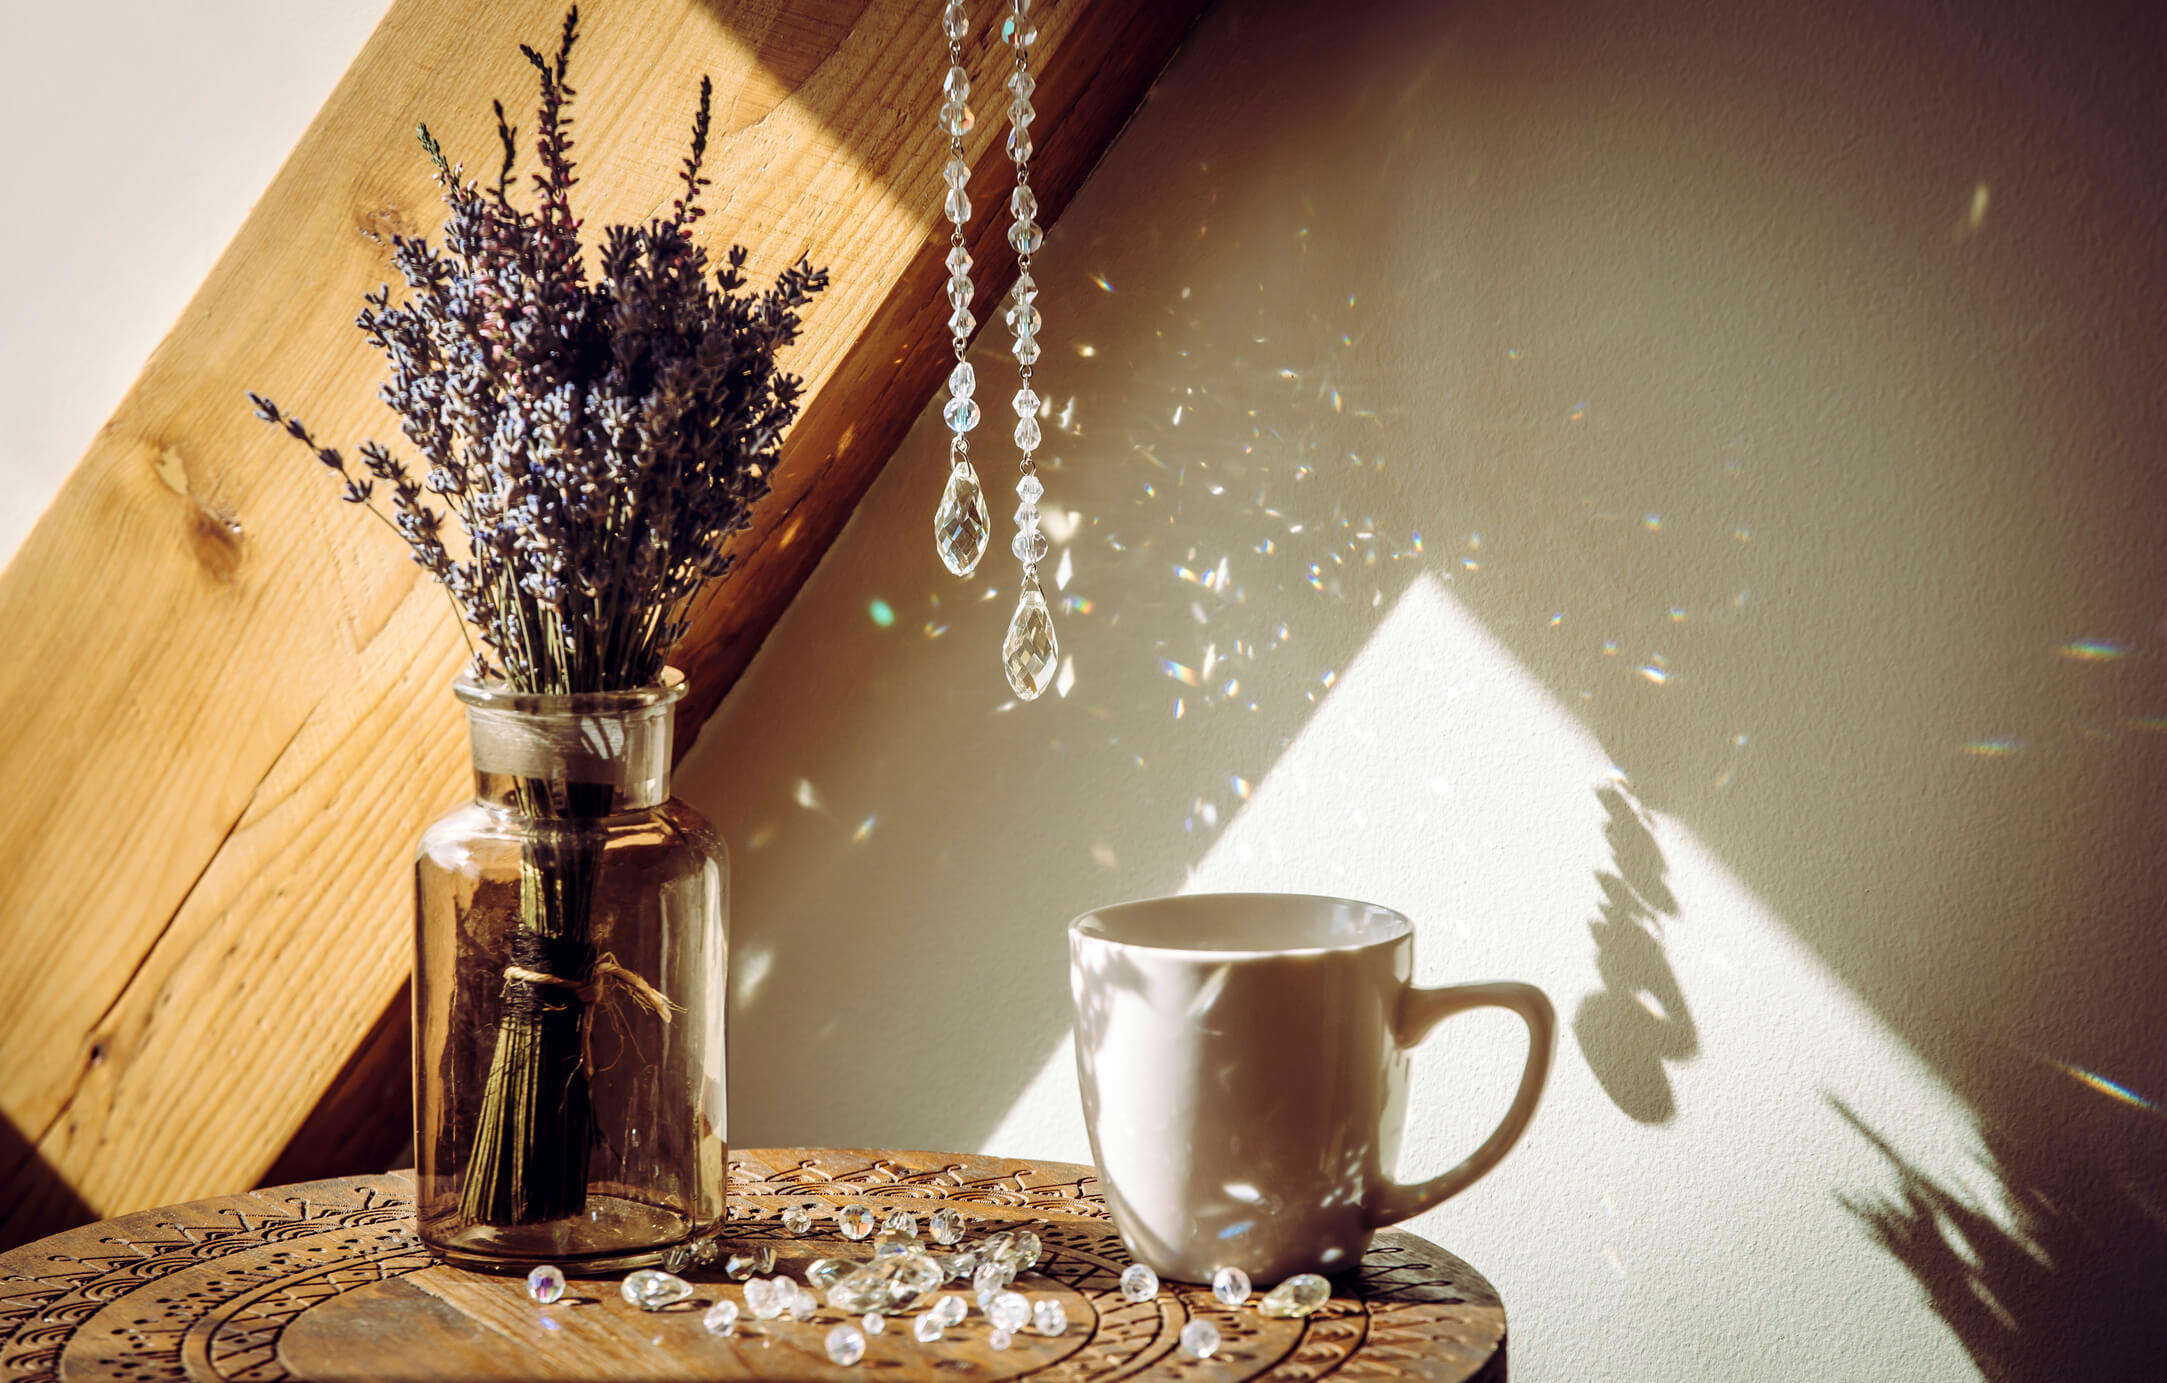 A jewelled sun catch hanging over a vase containing lavender and a white mug on a wooden table